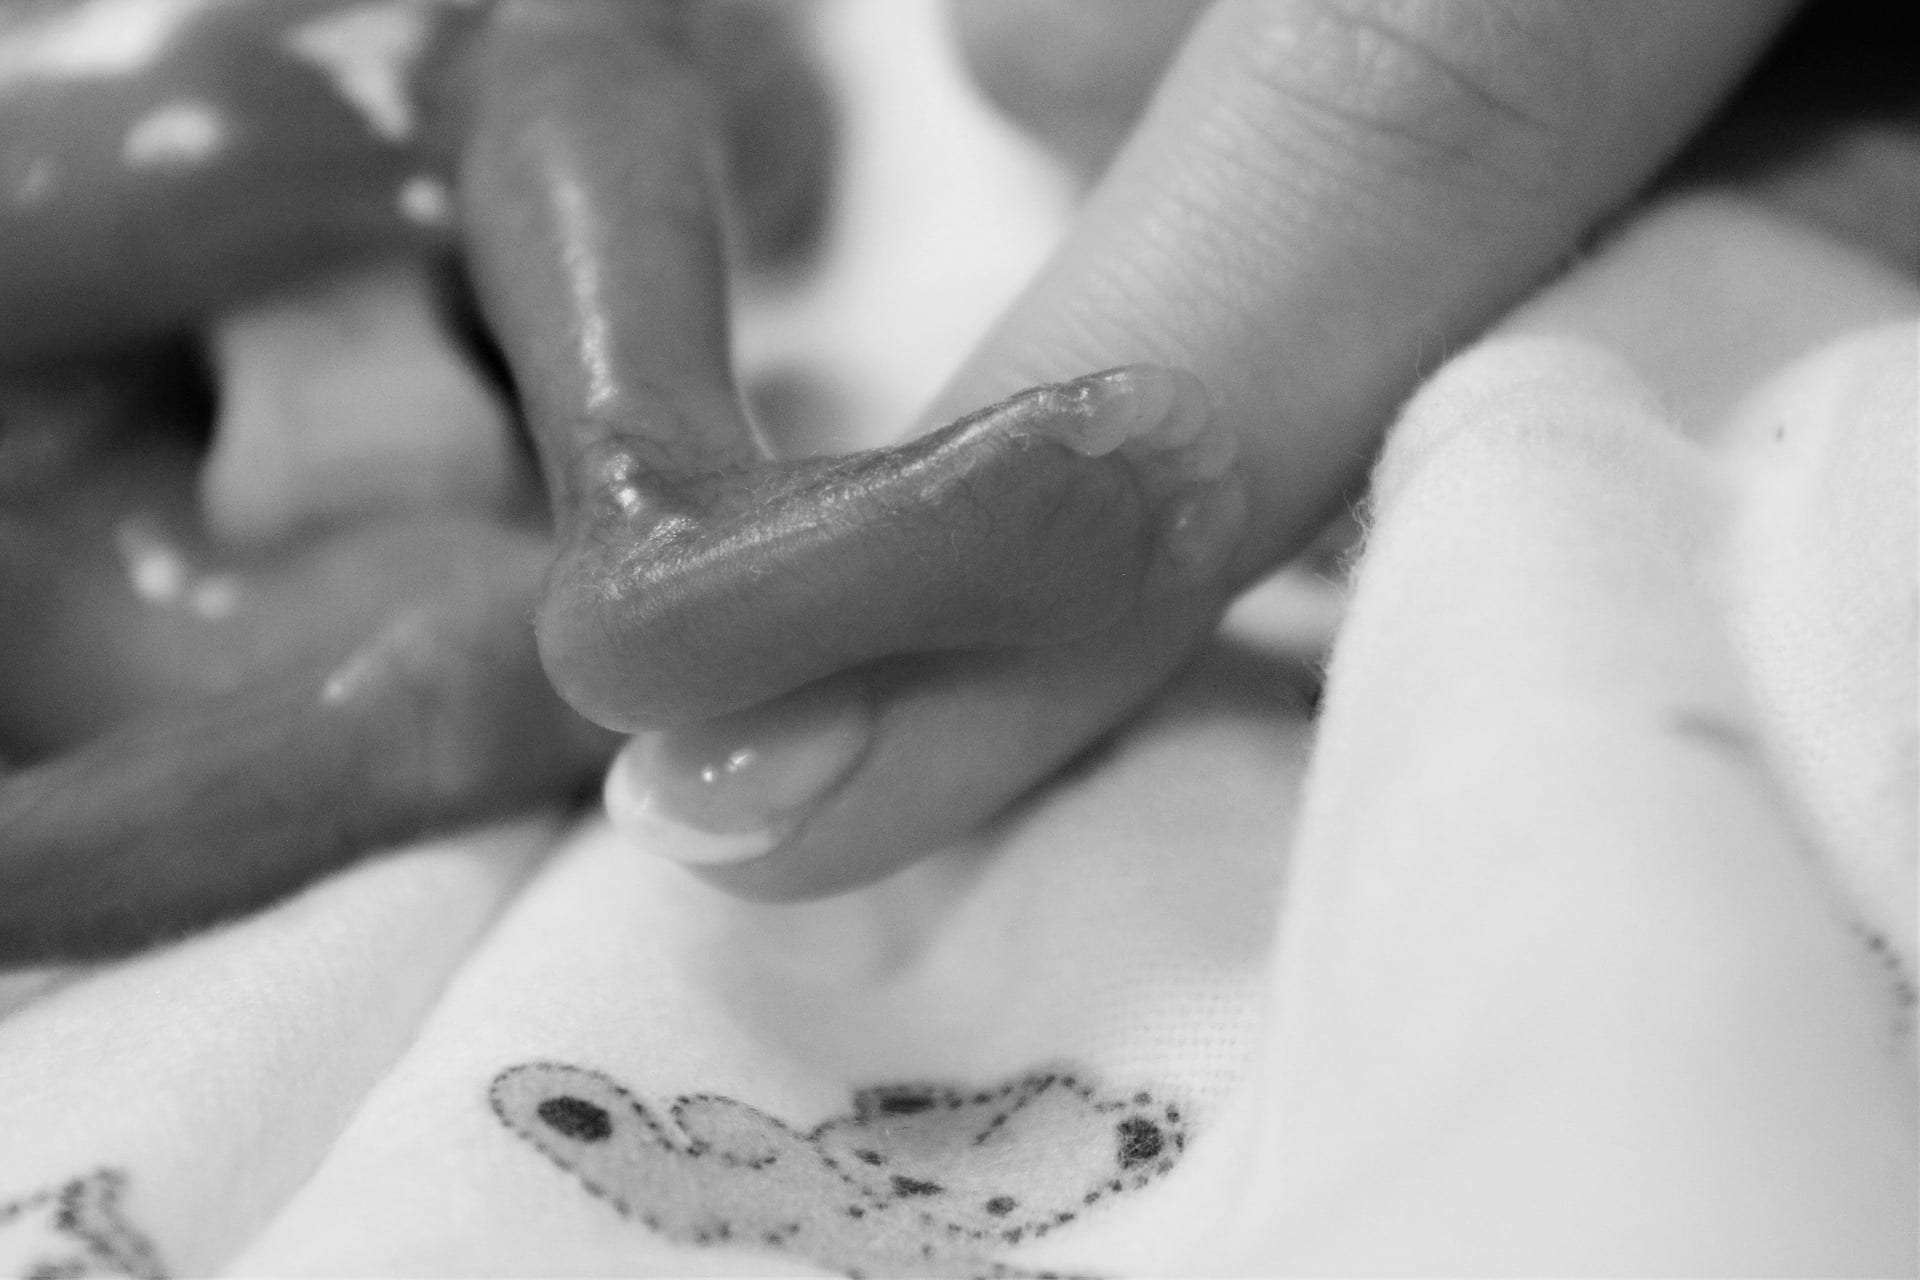 Judge Gives Abortion Industry a Win, Allows Barbaric Dismemberment Abortions